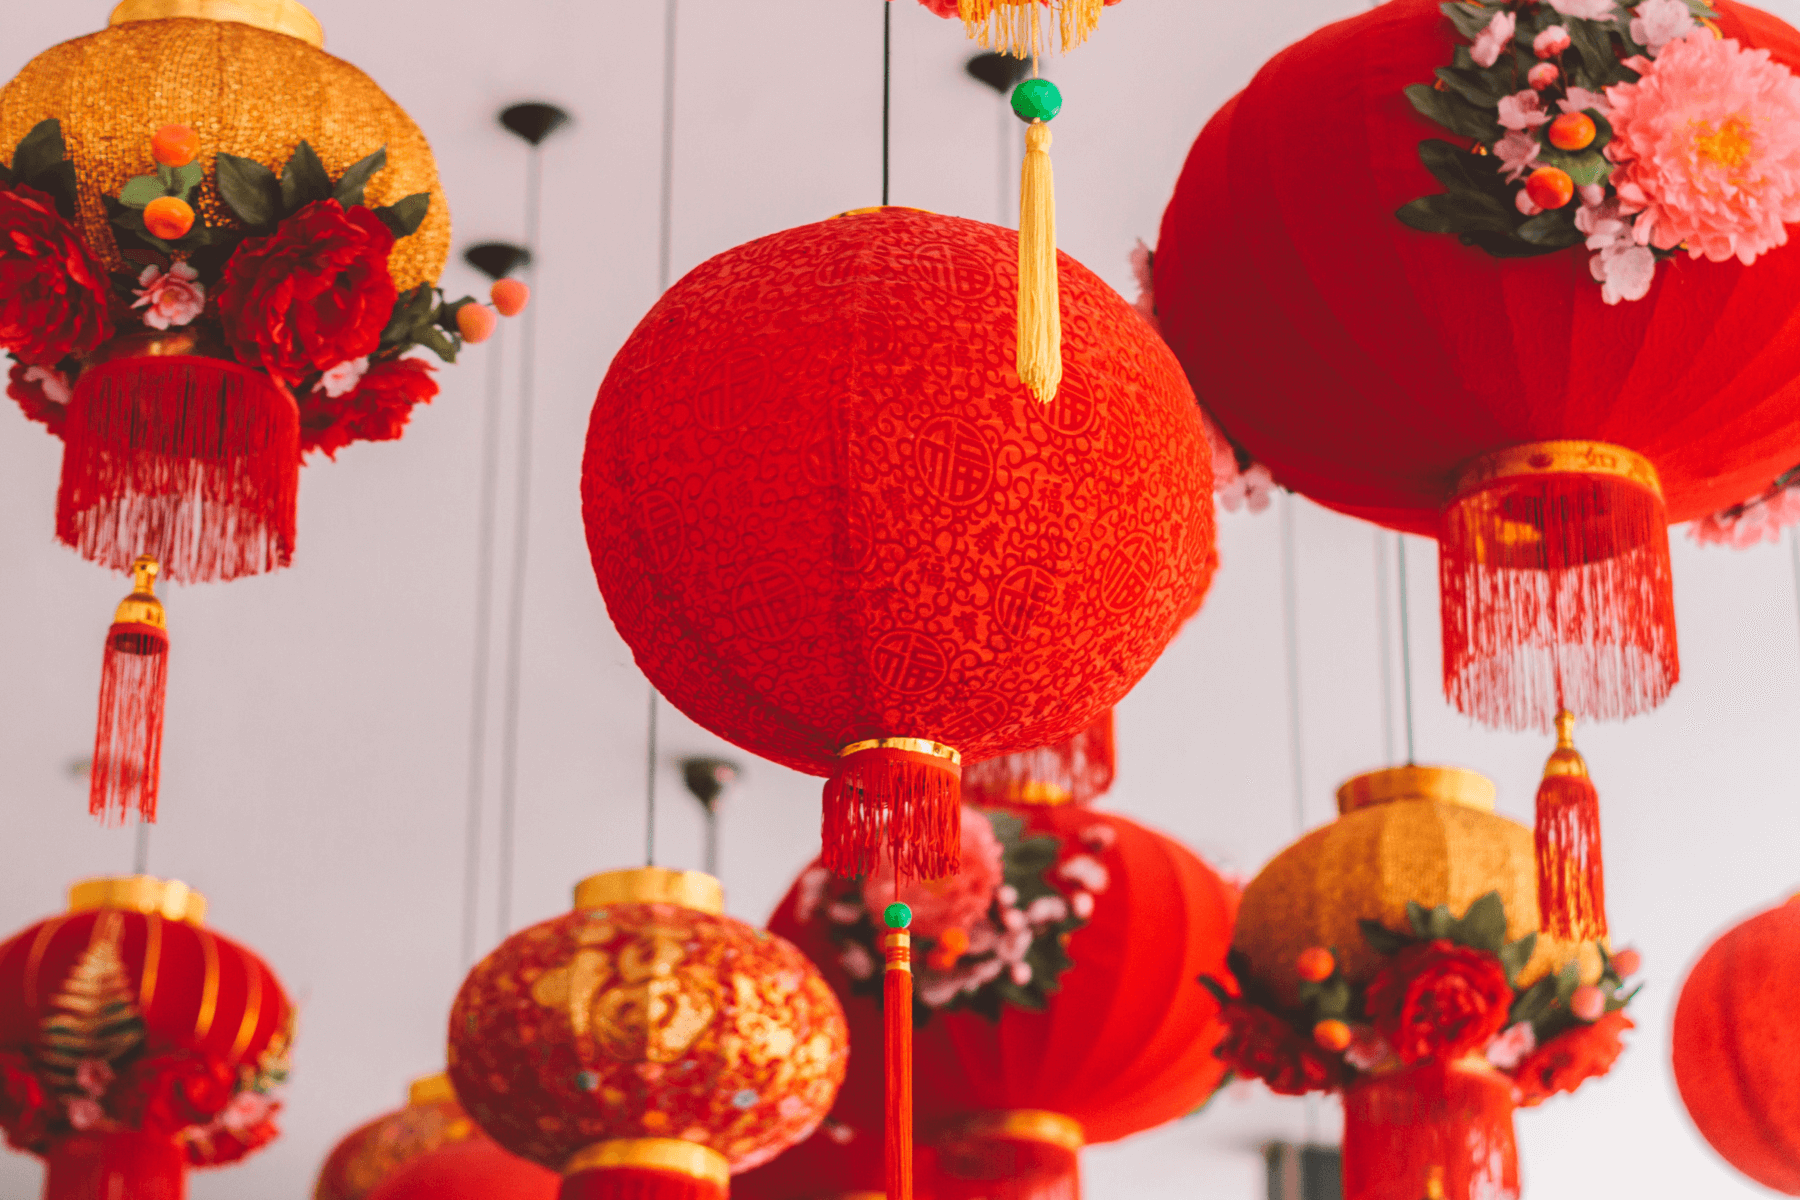 Good fortune awaits with our take on these golden Lunar New Year traditions